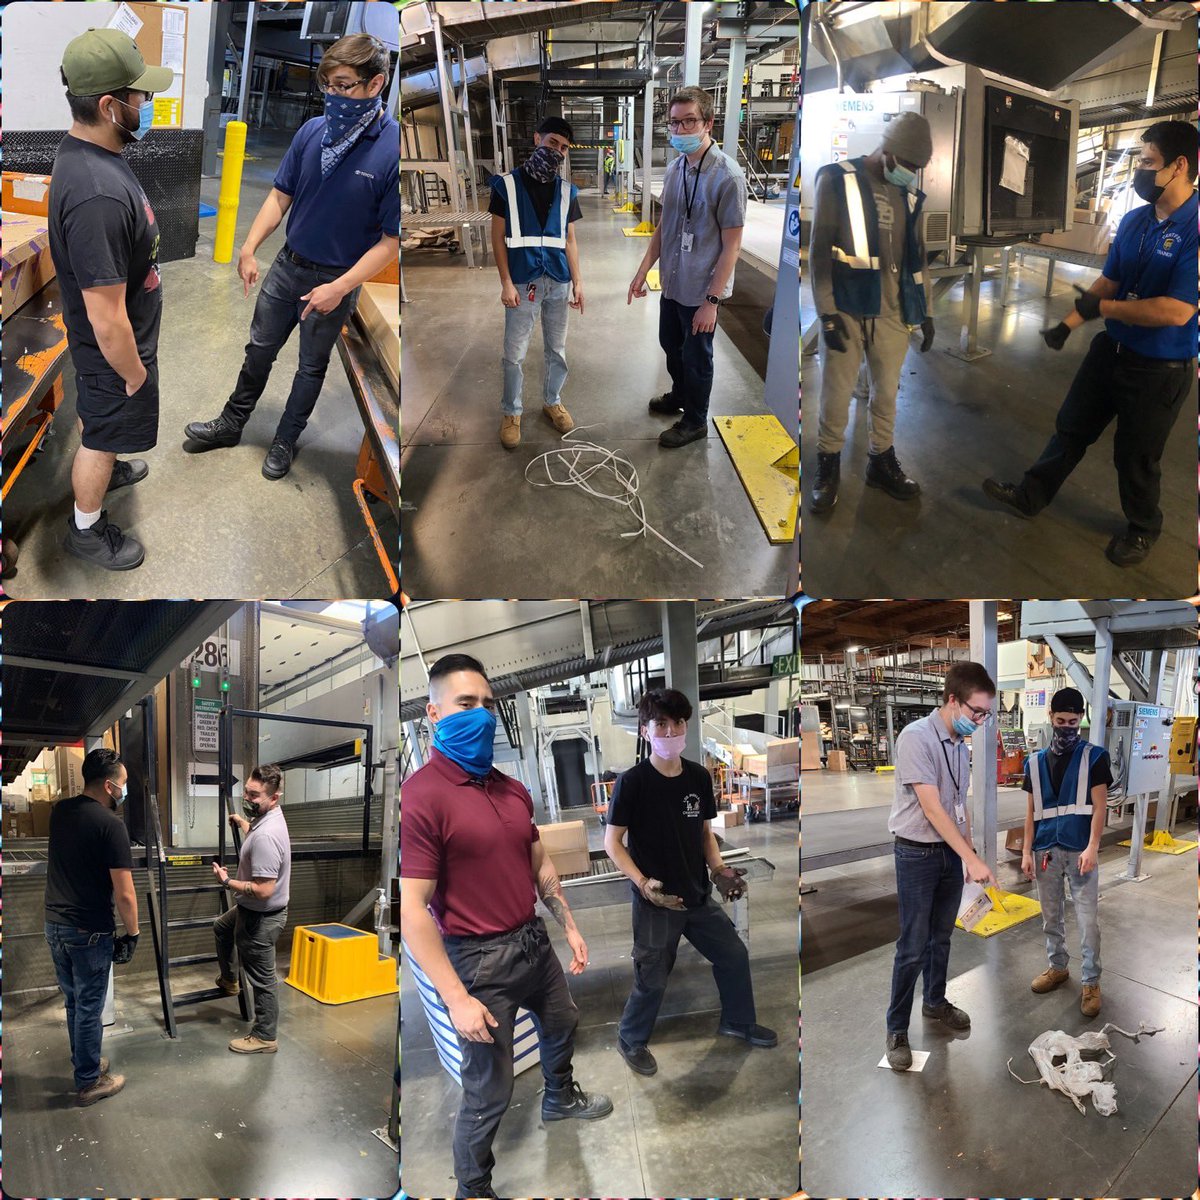 Ontario morning sort conducting the APRIL RISK CHALLENGE - SLIPS & FALLS. Make sure you speak to your folks this week! @tvargas14 @hrbobbyups @melirere @LouisTovalin